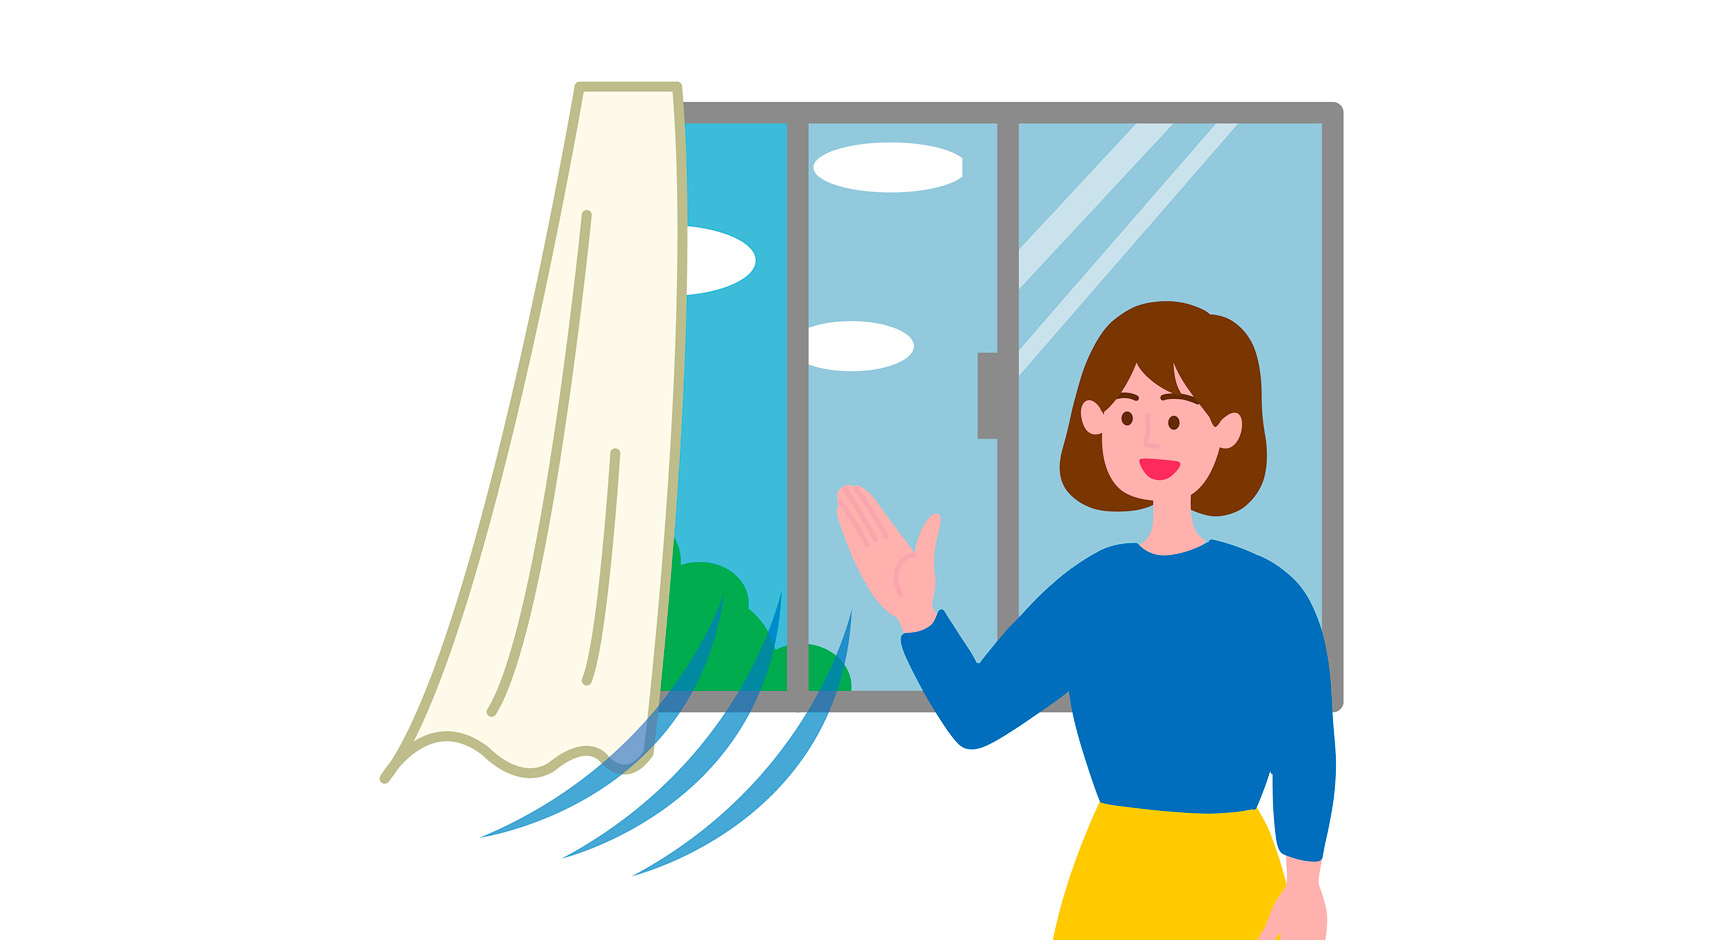 Illustration of woman opening window. Image: Getty.